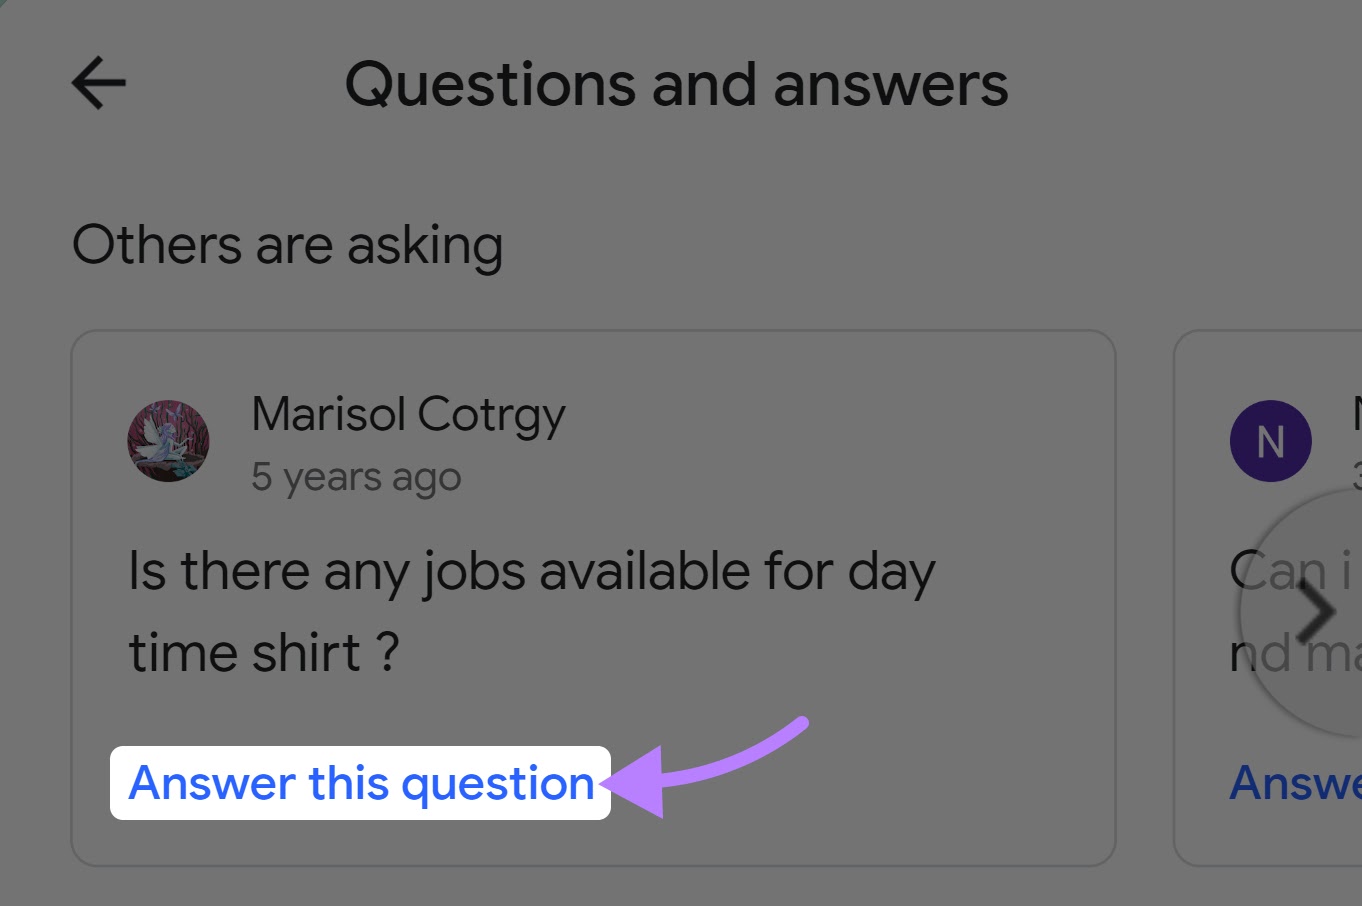 "Answer this question” button highlighted